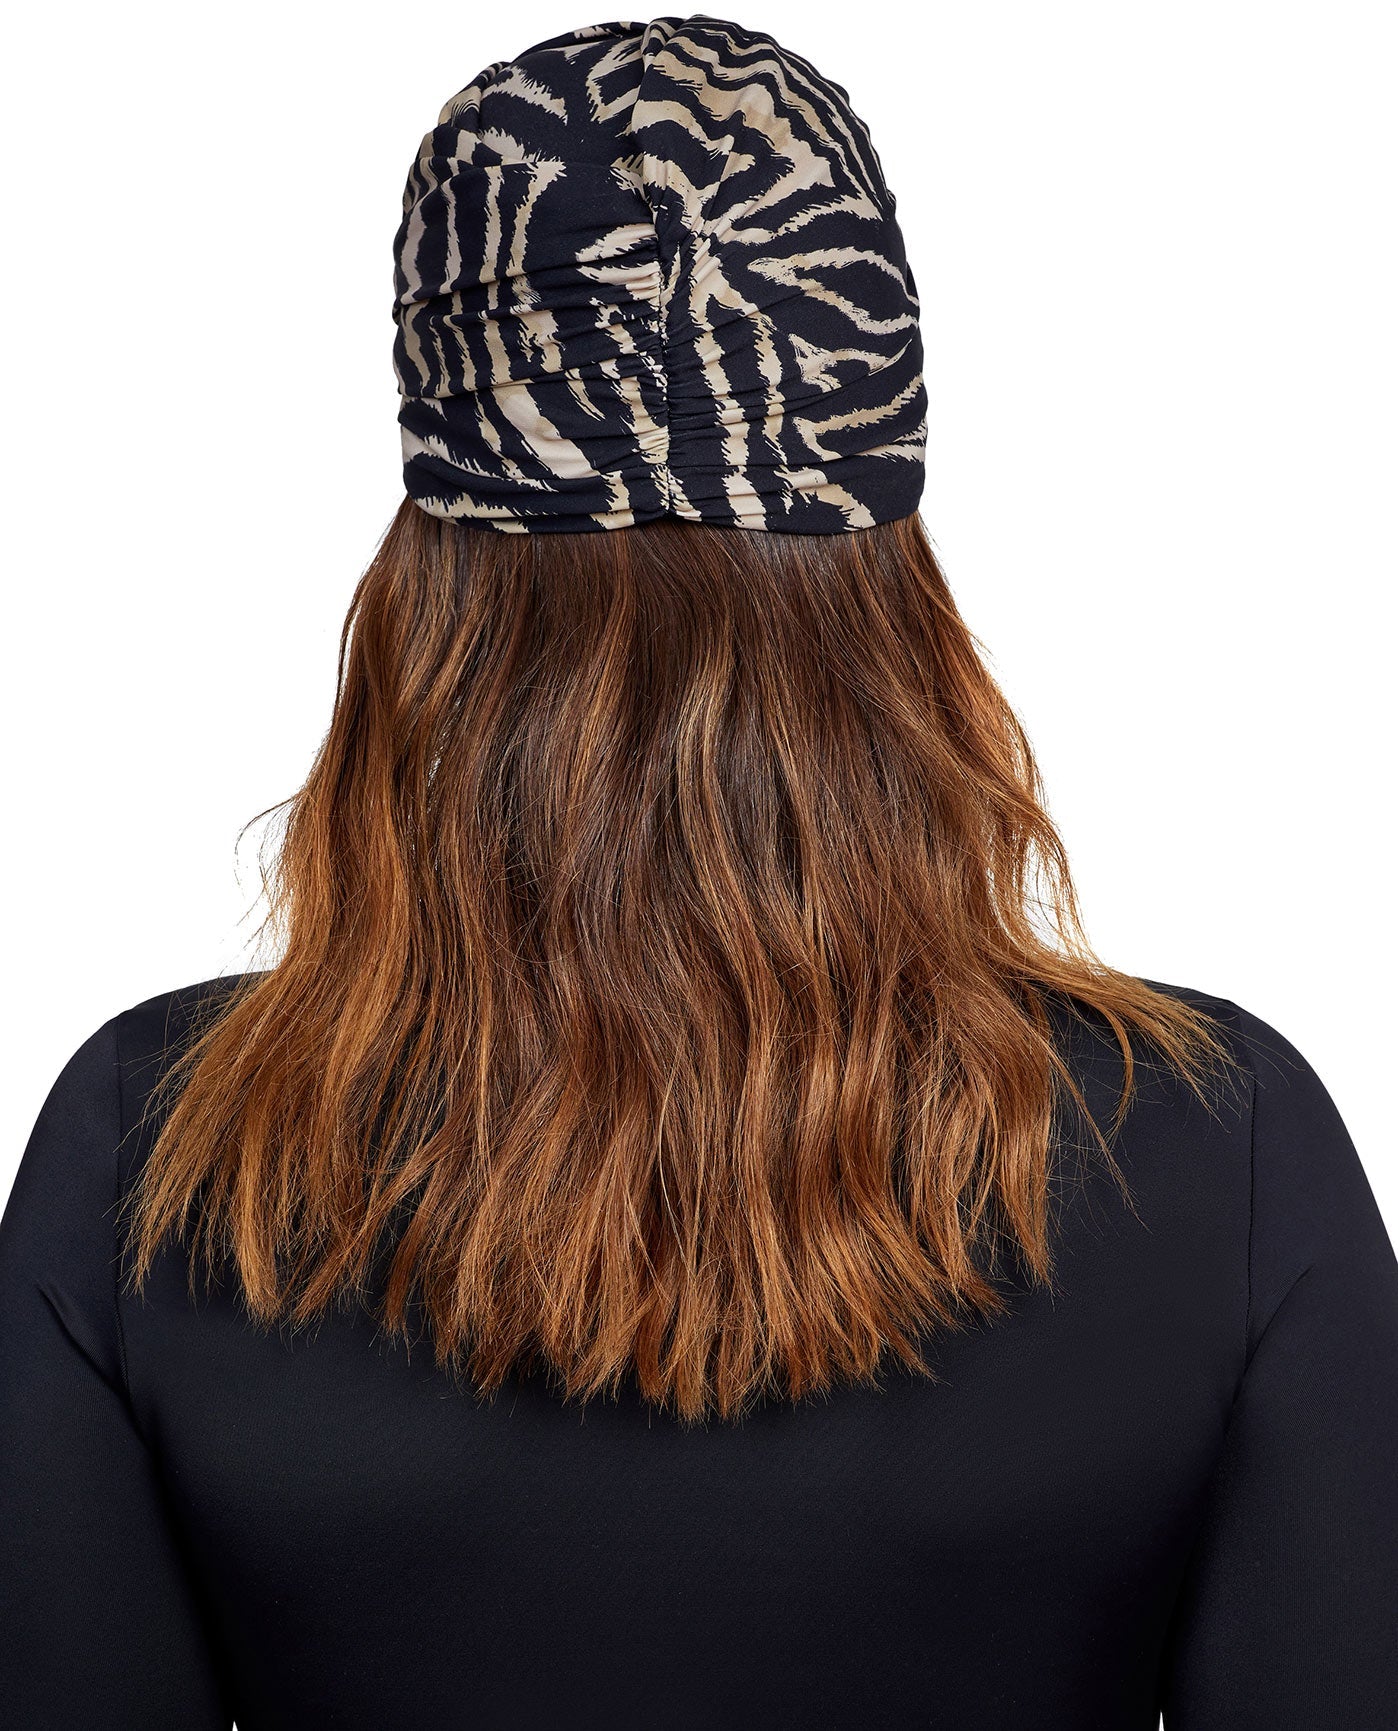 Back View Of Gottex Modest Knotted Hair Covering | GOTTEX MODEST WILDLIFE BROWN